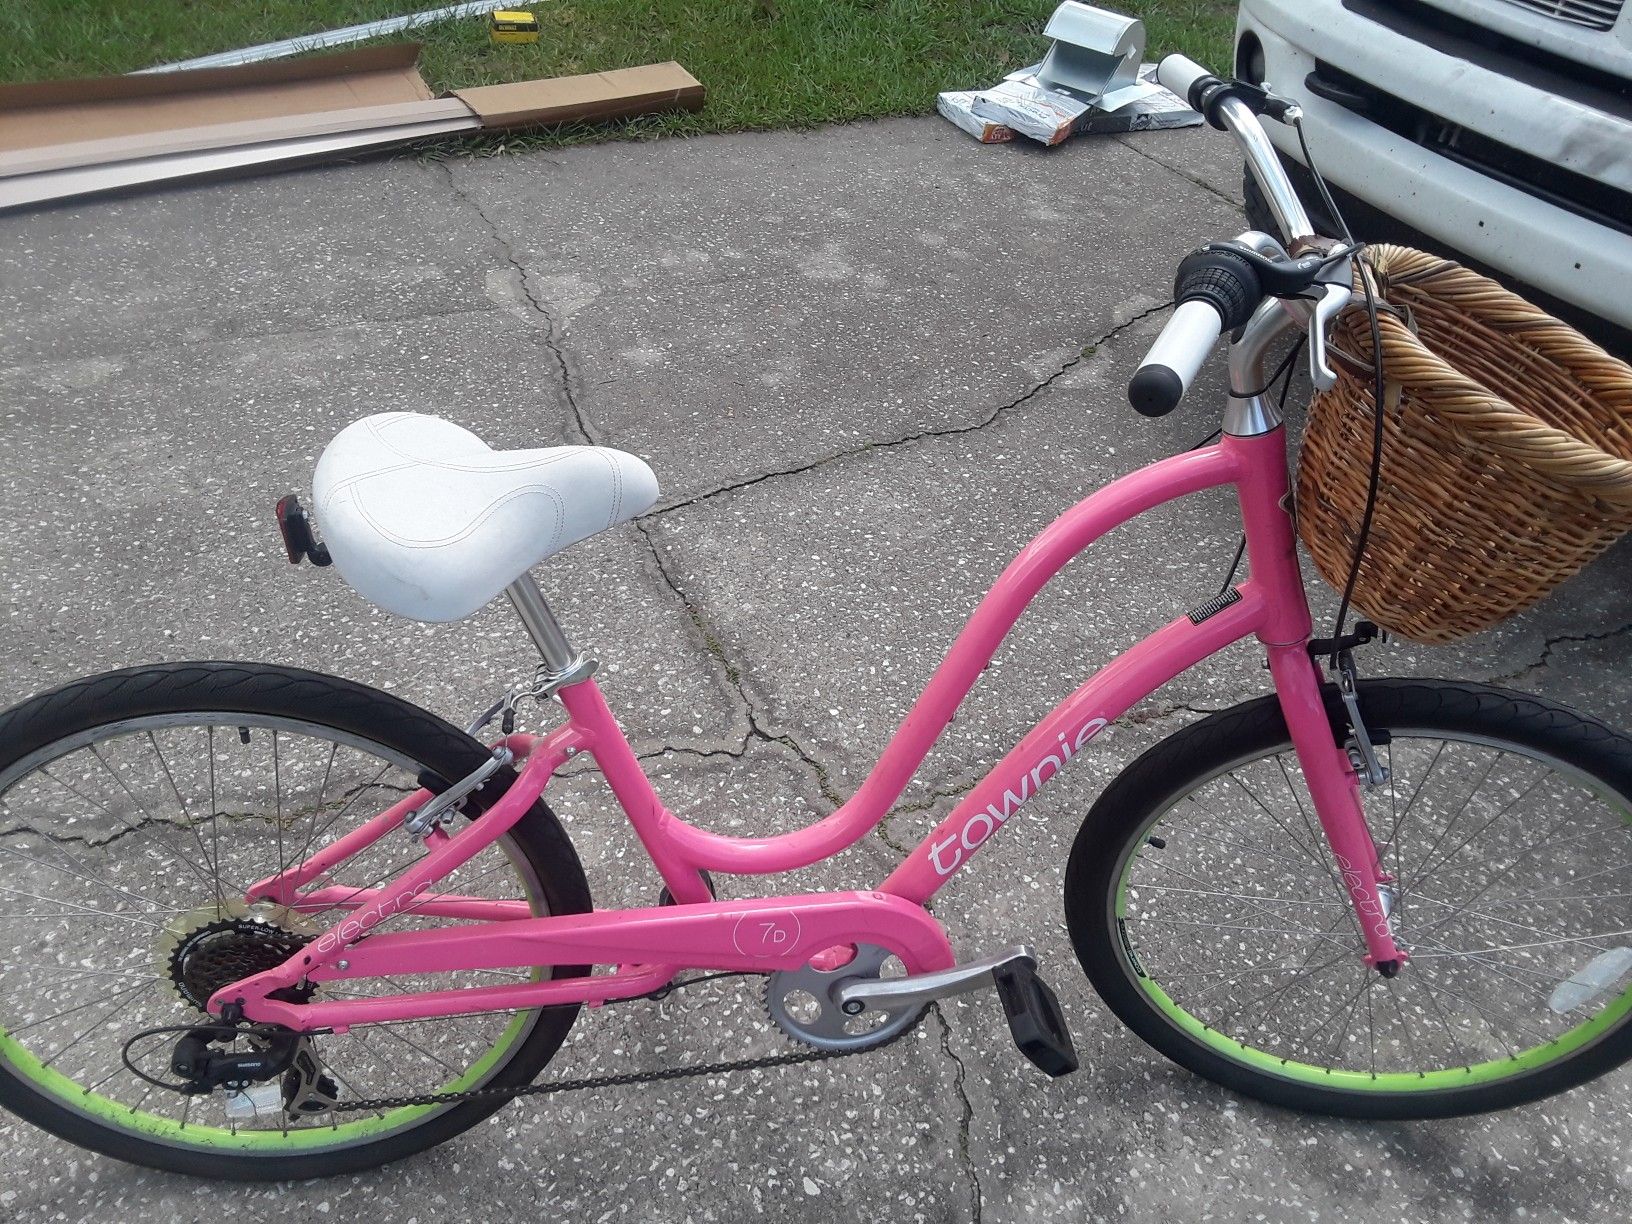 Electra Townie 7d 7speed Cruiser bike like new, with 26" tires, medium frame. $250 FIRM.